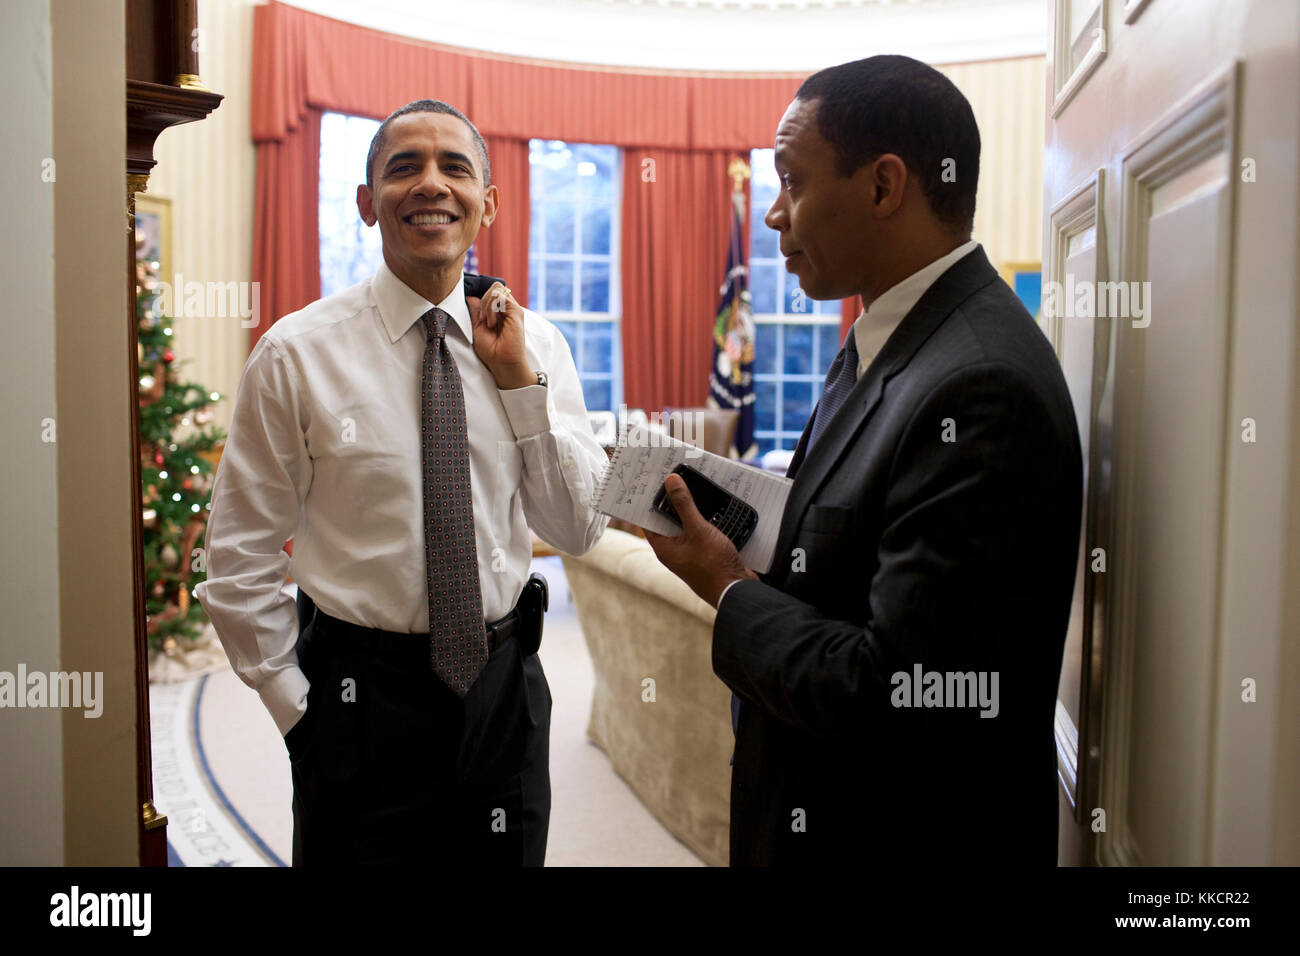 President Barack Obama talks with Rob Nabors, Assistant to the President for Legislative Affairs, in the Oval Office, Dec. 22, 2011. Nabors informed President Obama that a bipartisan agreement was reached to extend the payroll tax cut. Stock Photo